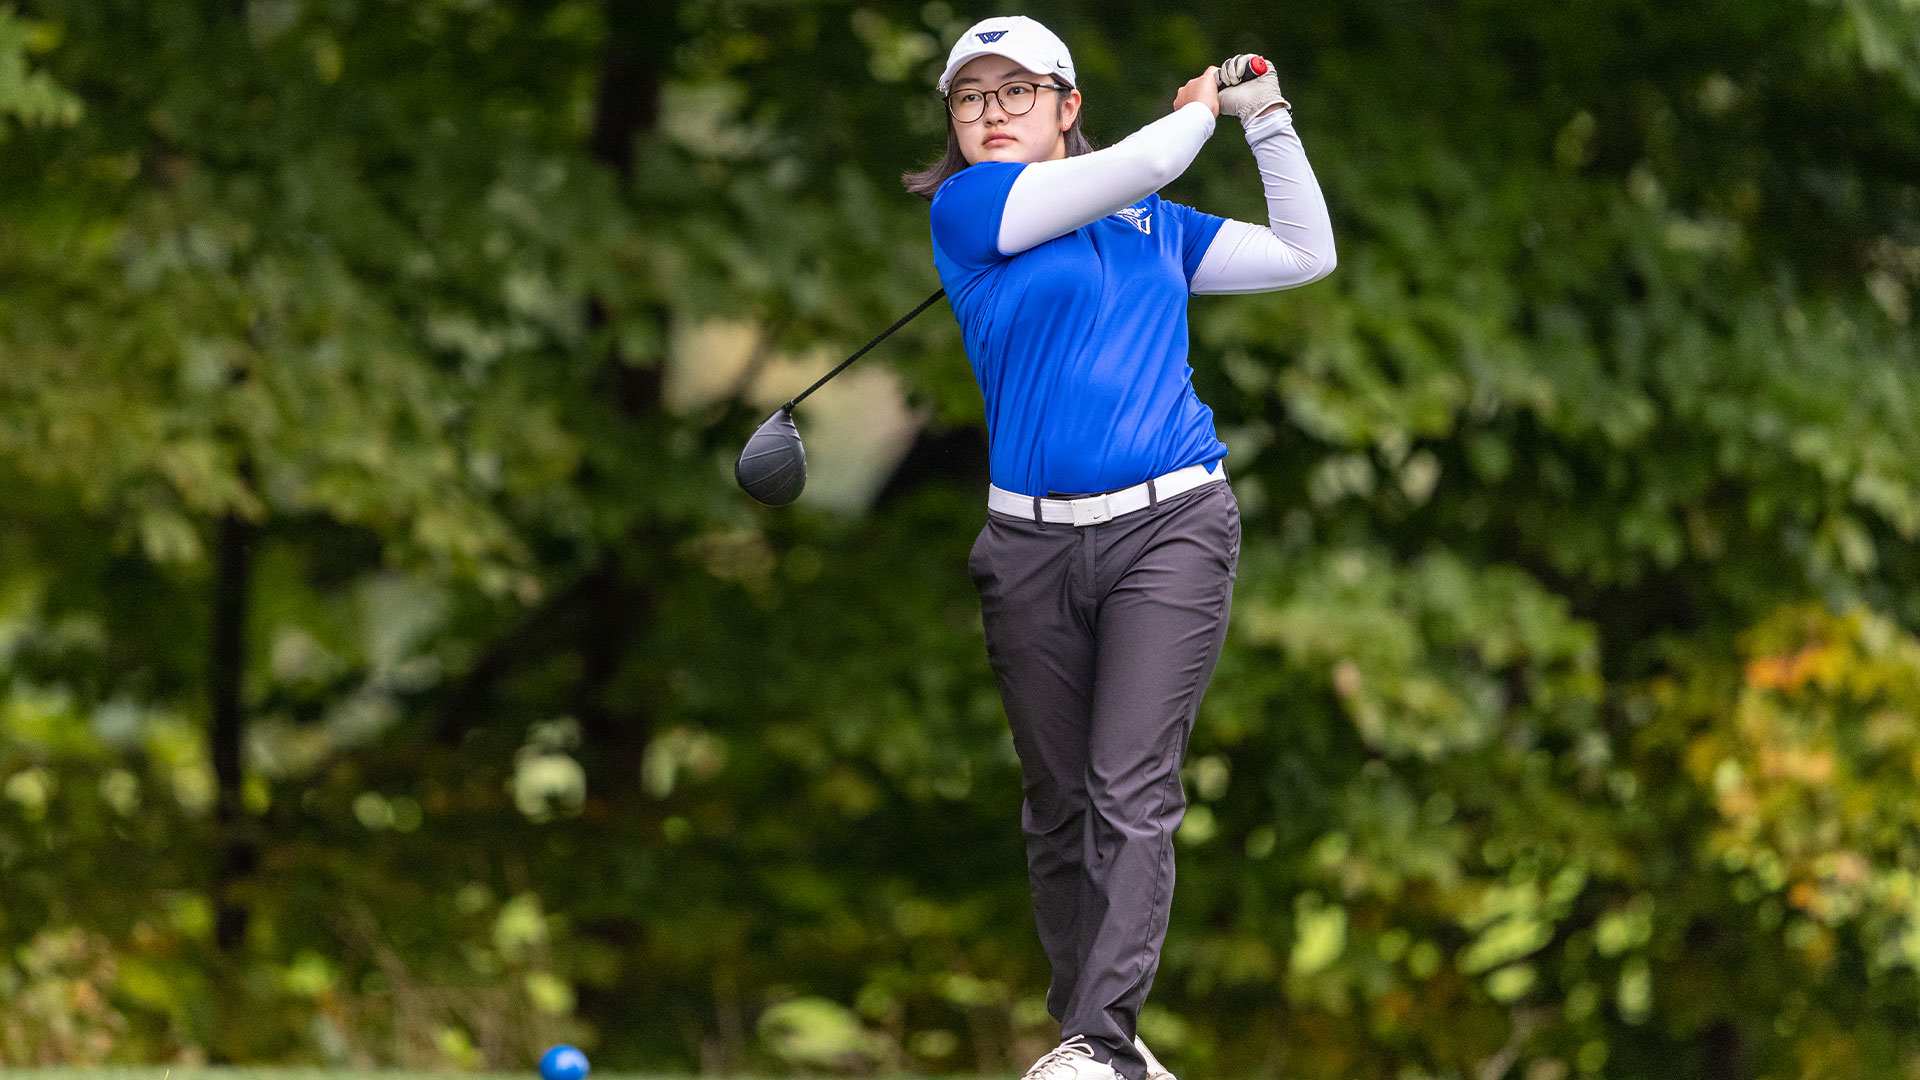 Wellesley Golf 4th After Day One of Williams Invitational